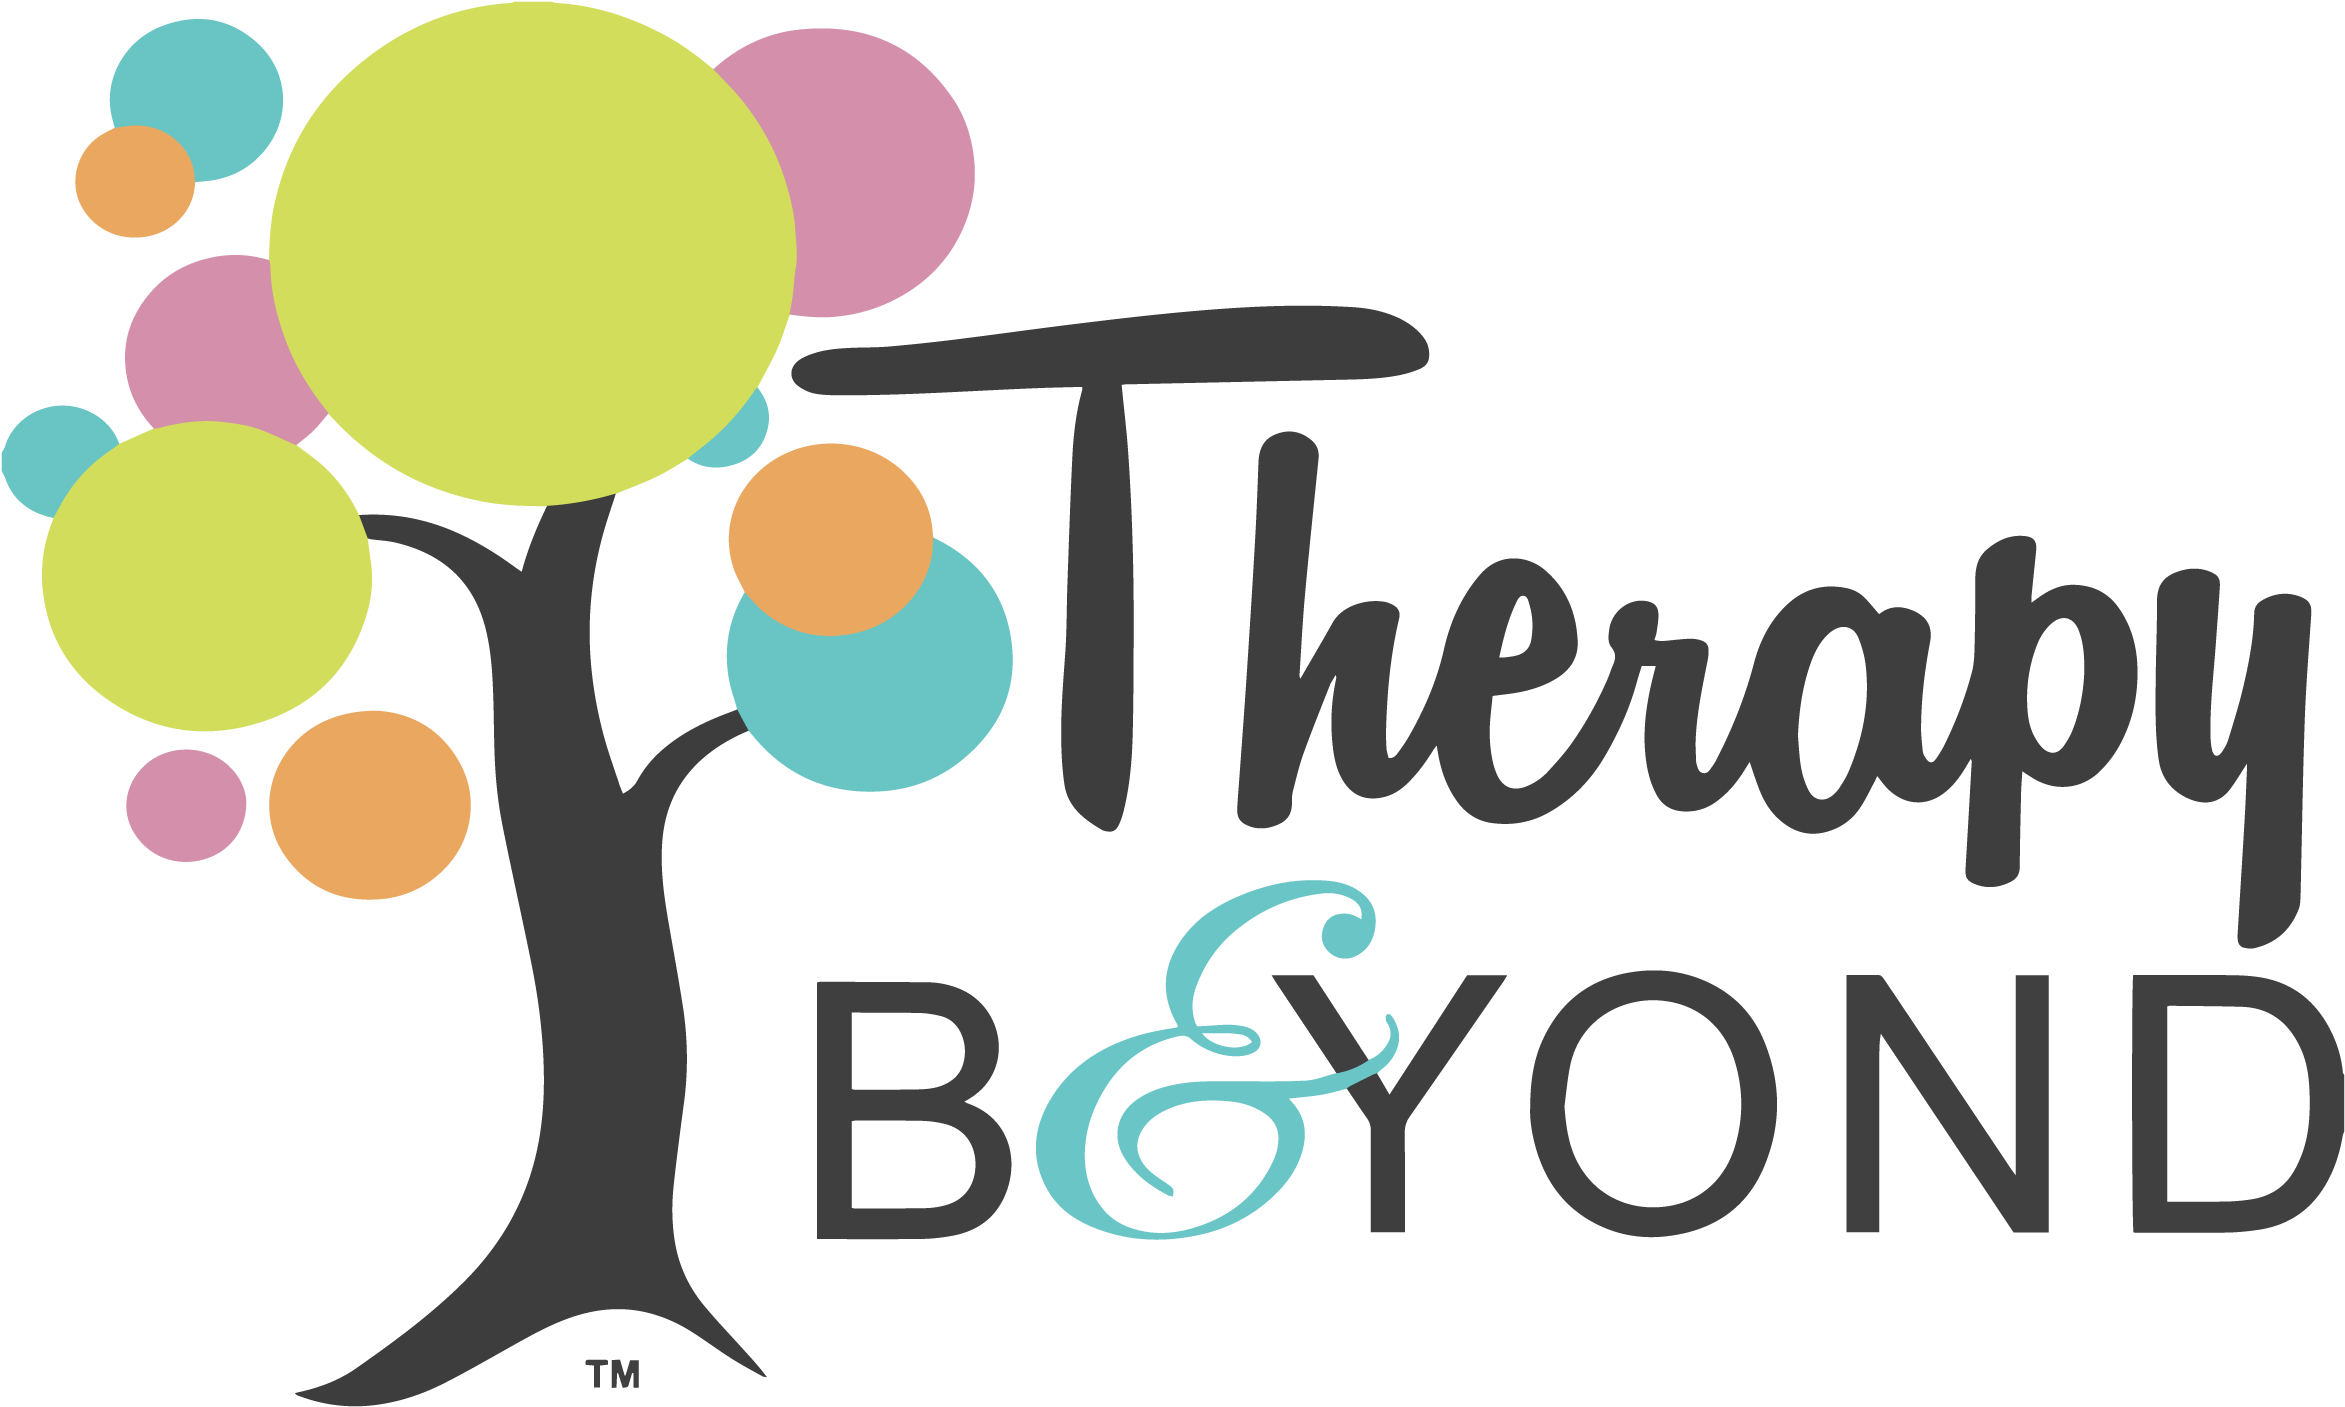 Therapy And Beyond Provides Intensive, - Therapy And Beyond (2390x2196)